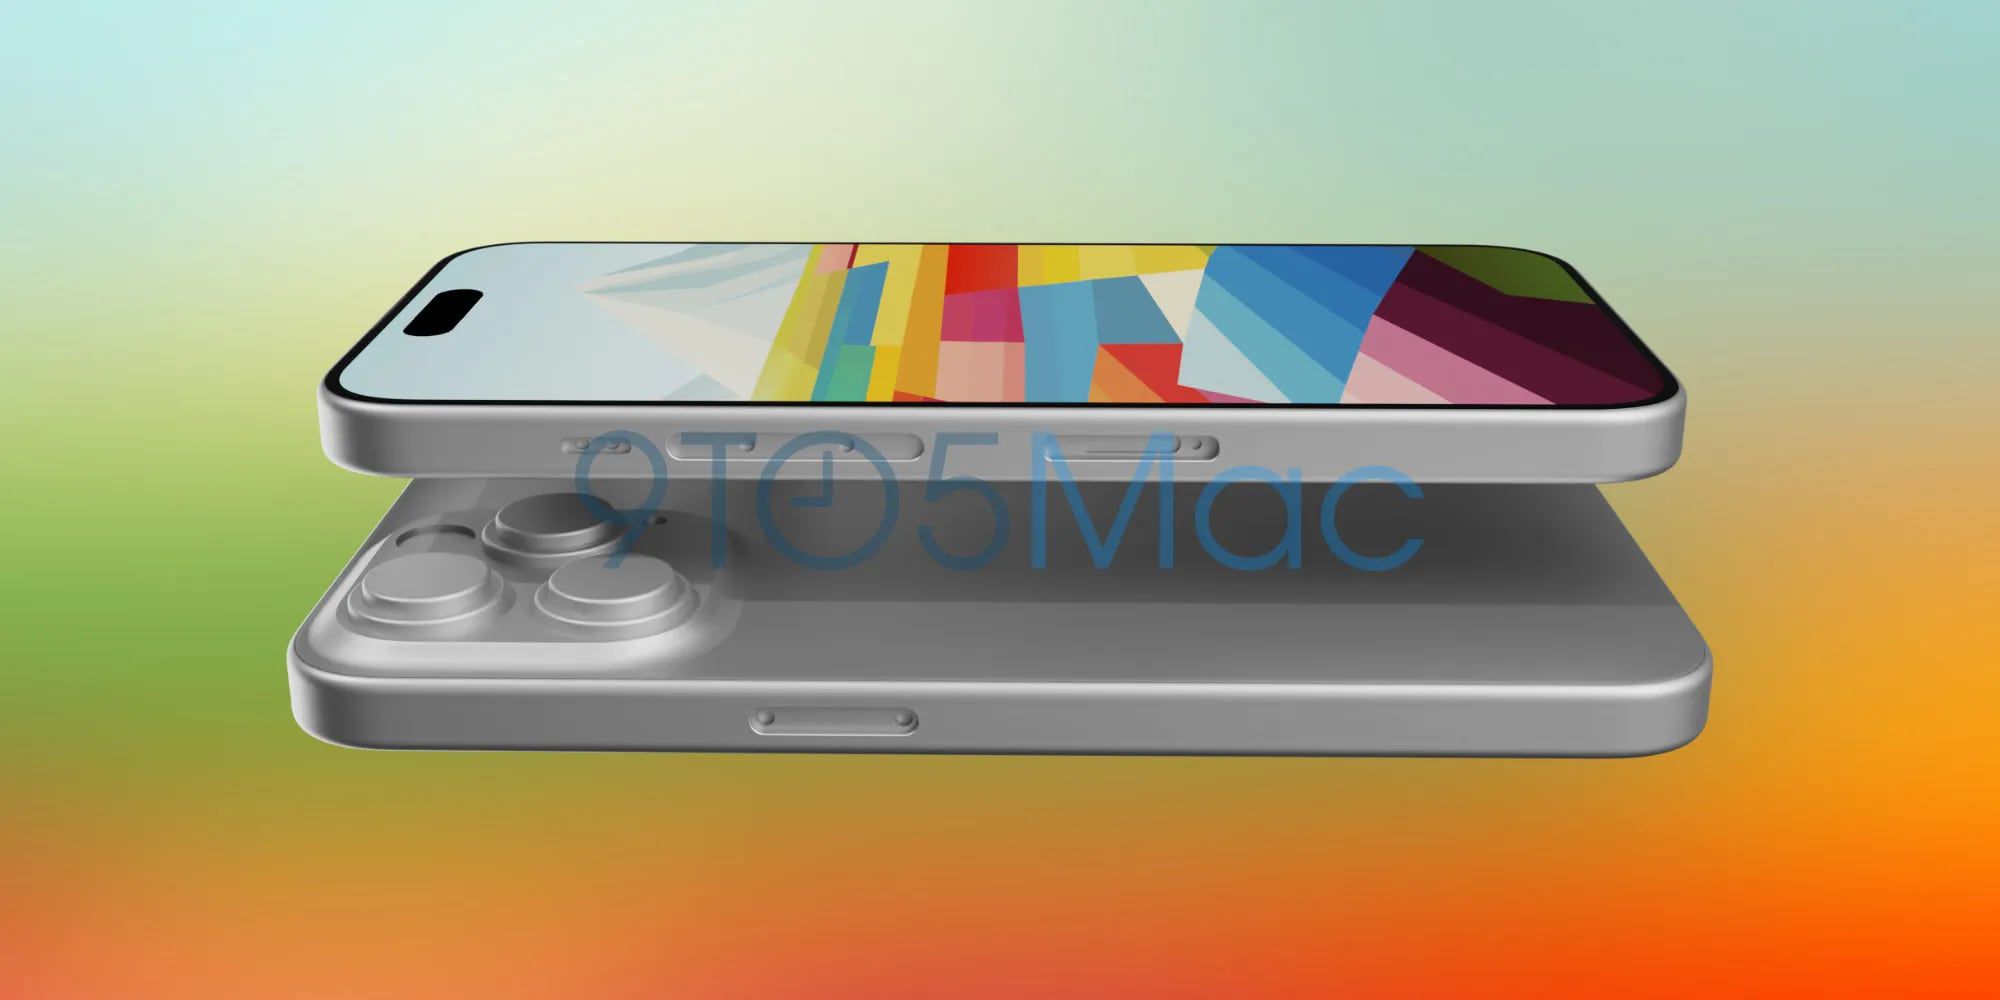 Rumored iPhone 15 Pro Design With Thinner Bezels, Thicker Camera Bump and USB-C Port Shown Off in Renders - macrumors.com